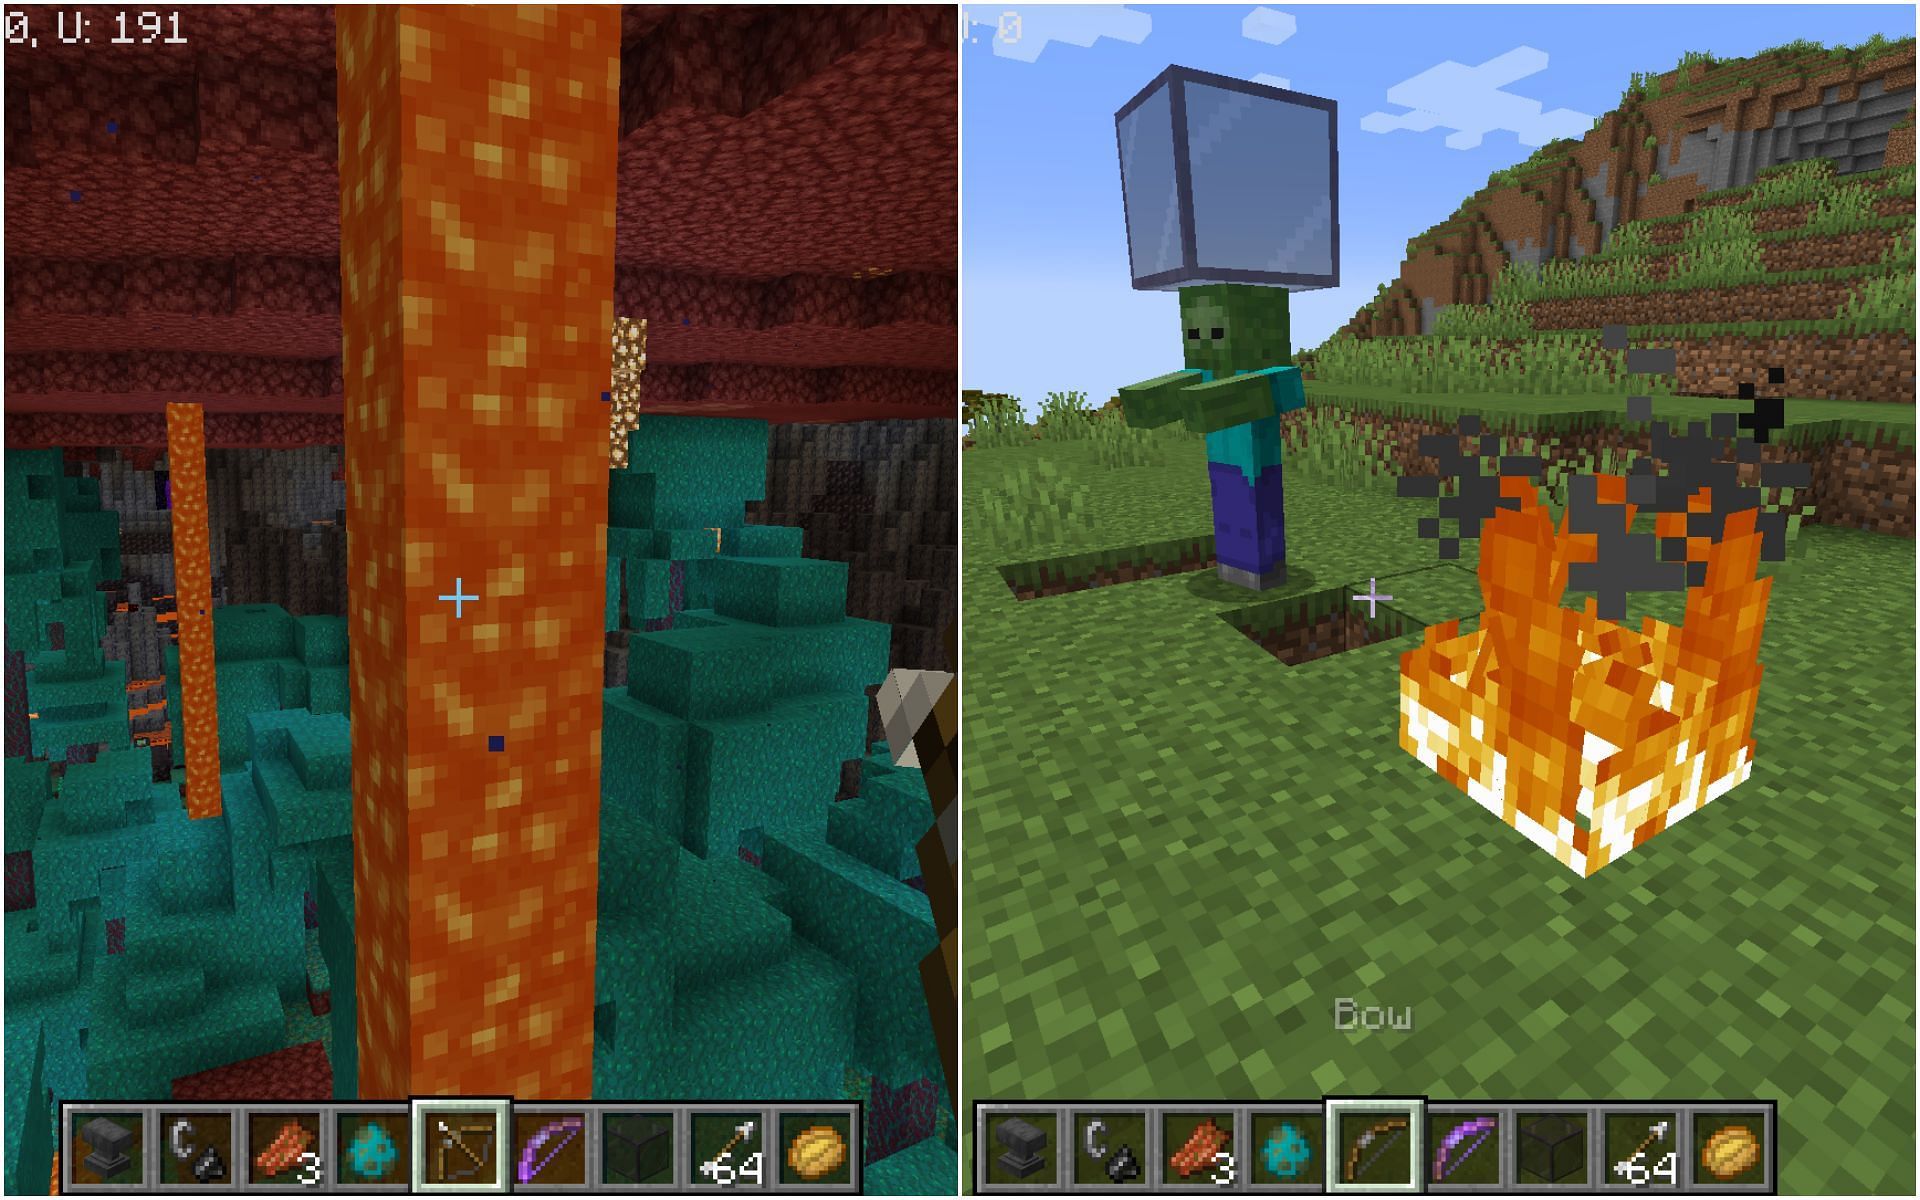 How To Make Flaming Arrows In Minecraft